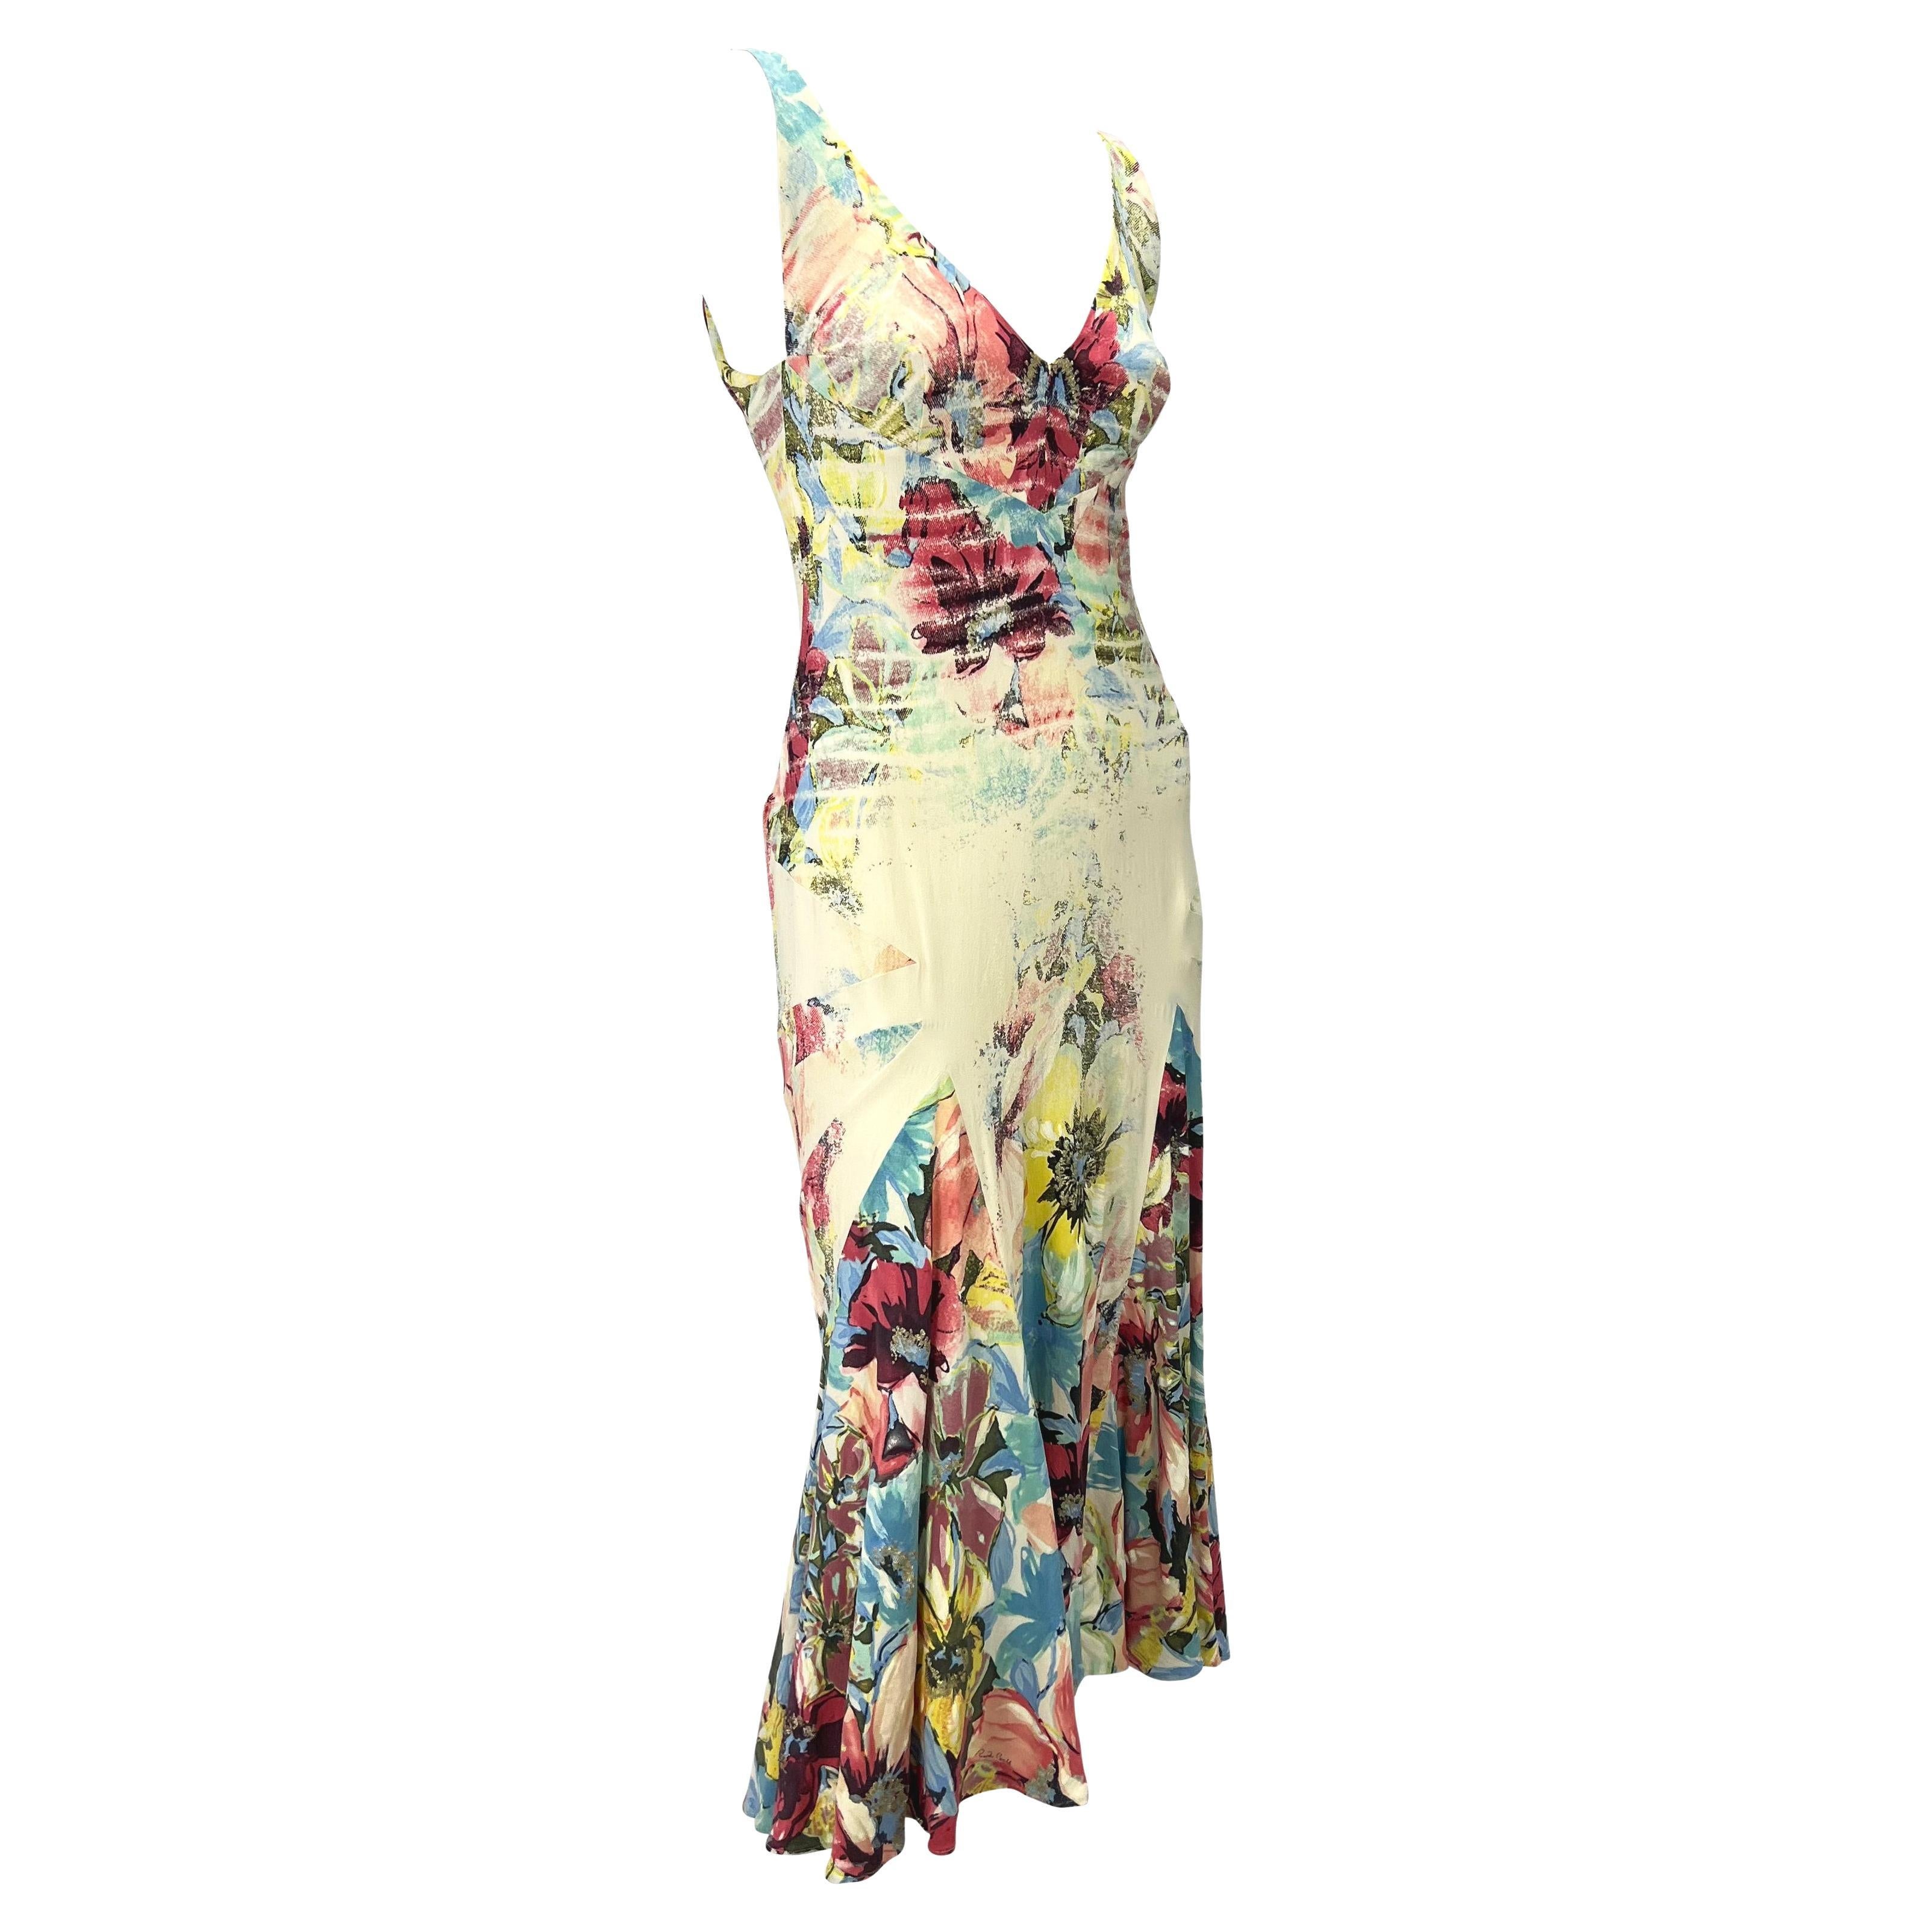 Women's S/S 2003 Roberto Cavalli Floral Abstract Watercolor Silk Stretch Flare Dress For Sale